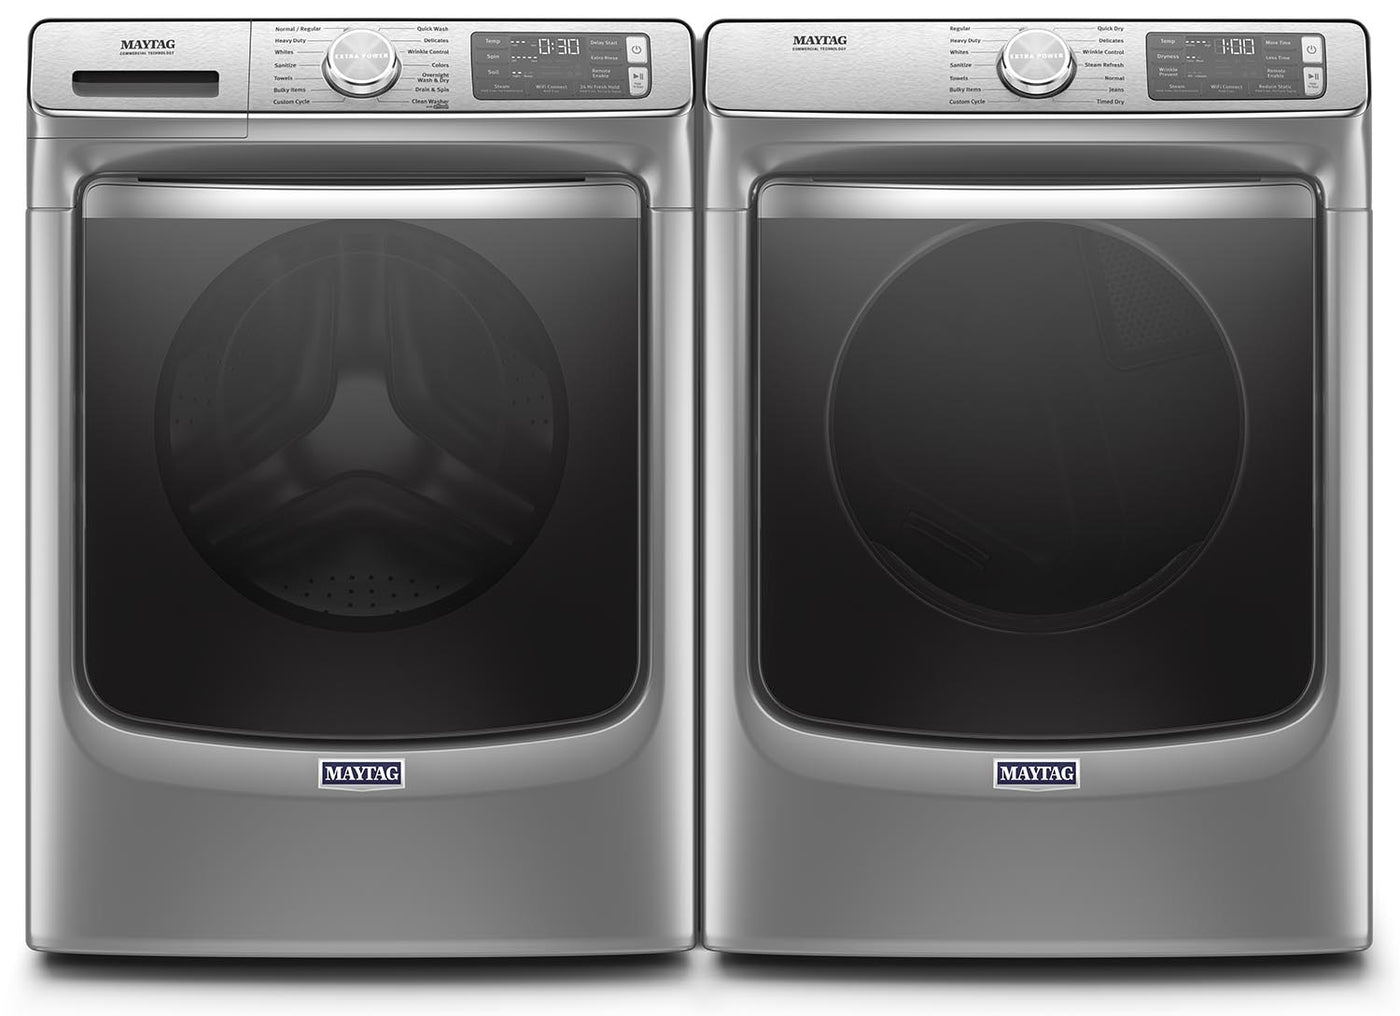 Maytag Metallic Slate Front-Load Washer (5.8 cu. ft.) & Electric Dryer (7.3 cu. ft.) - MHW8630HC/YMED8630HC